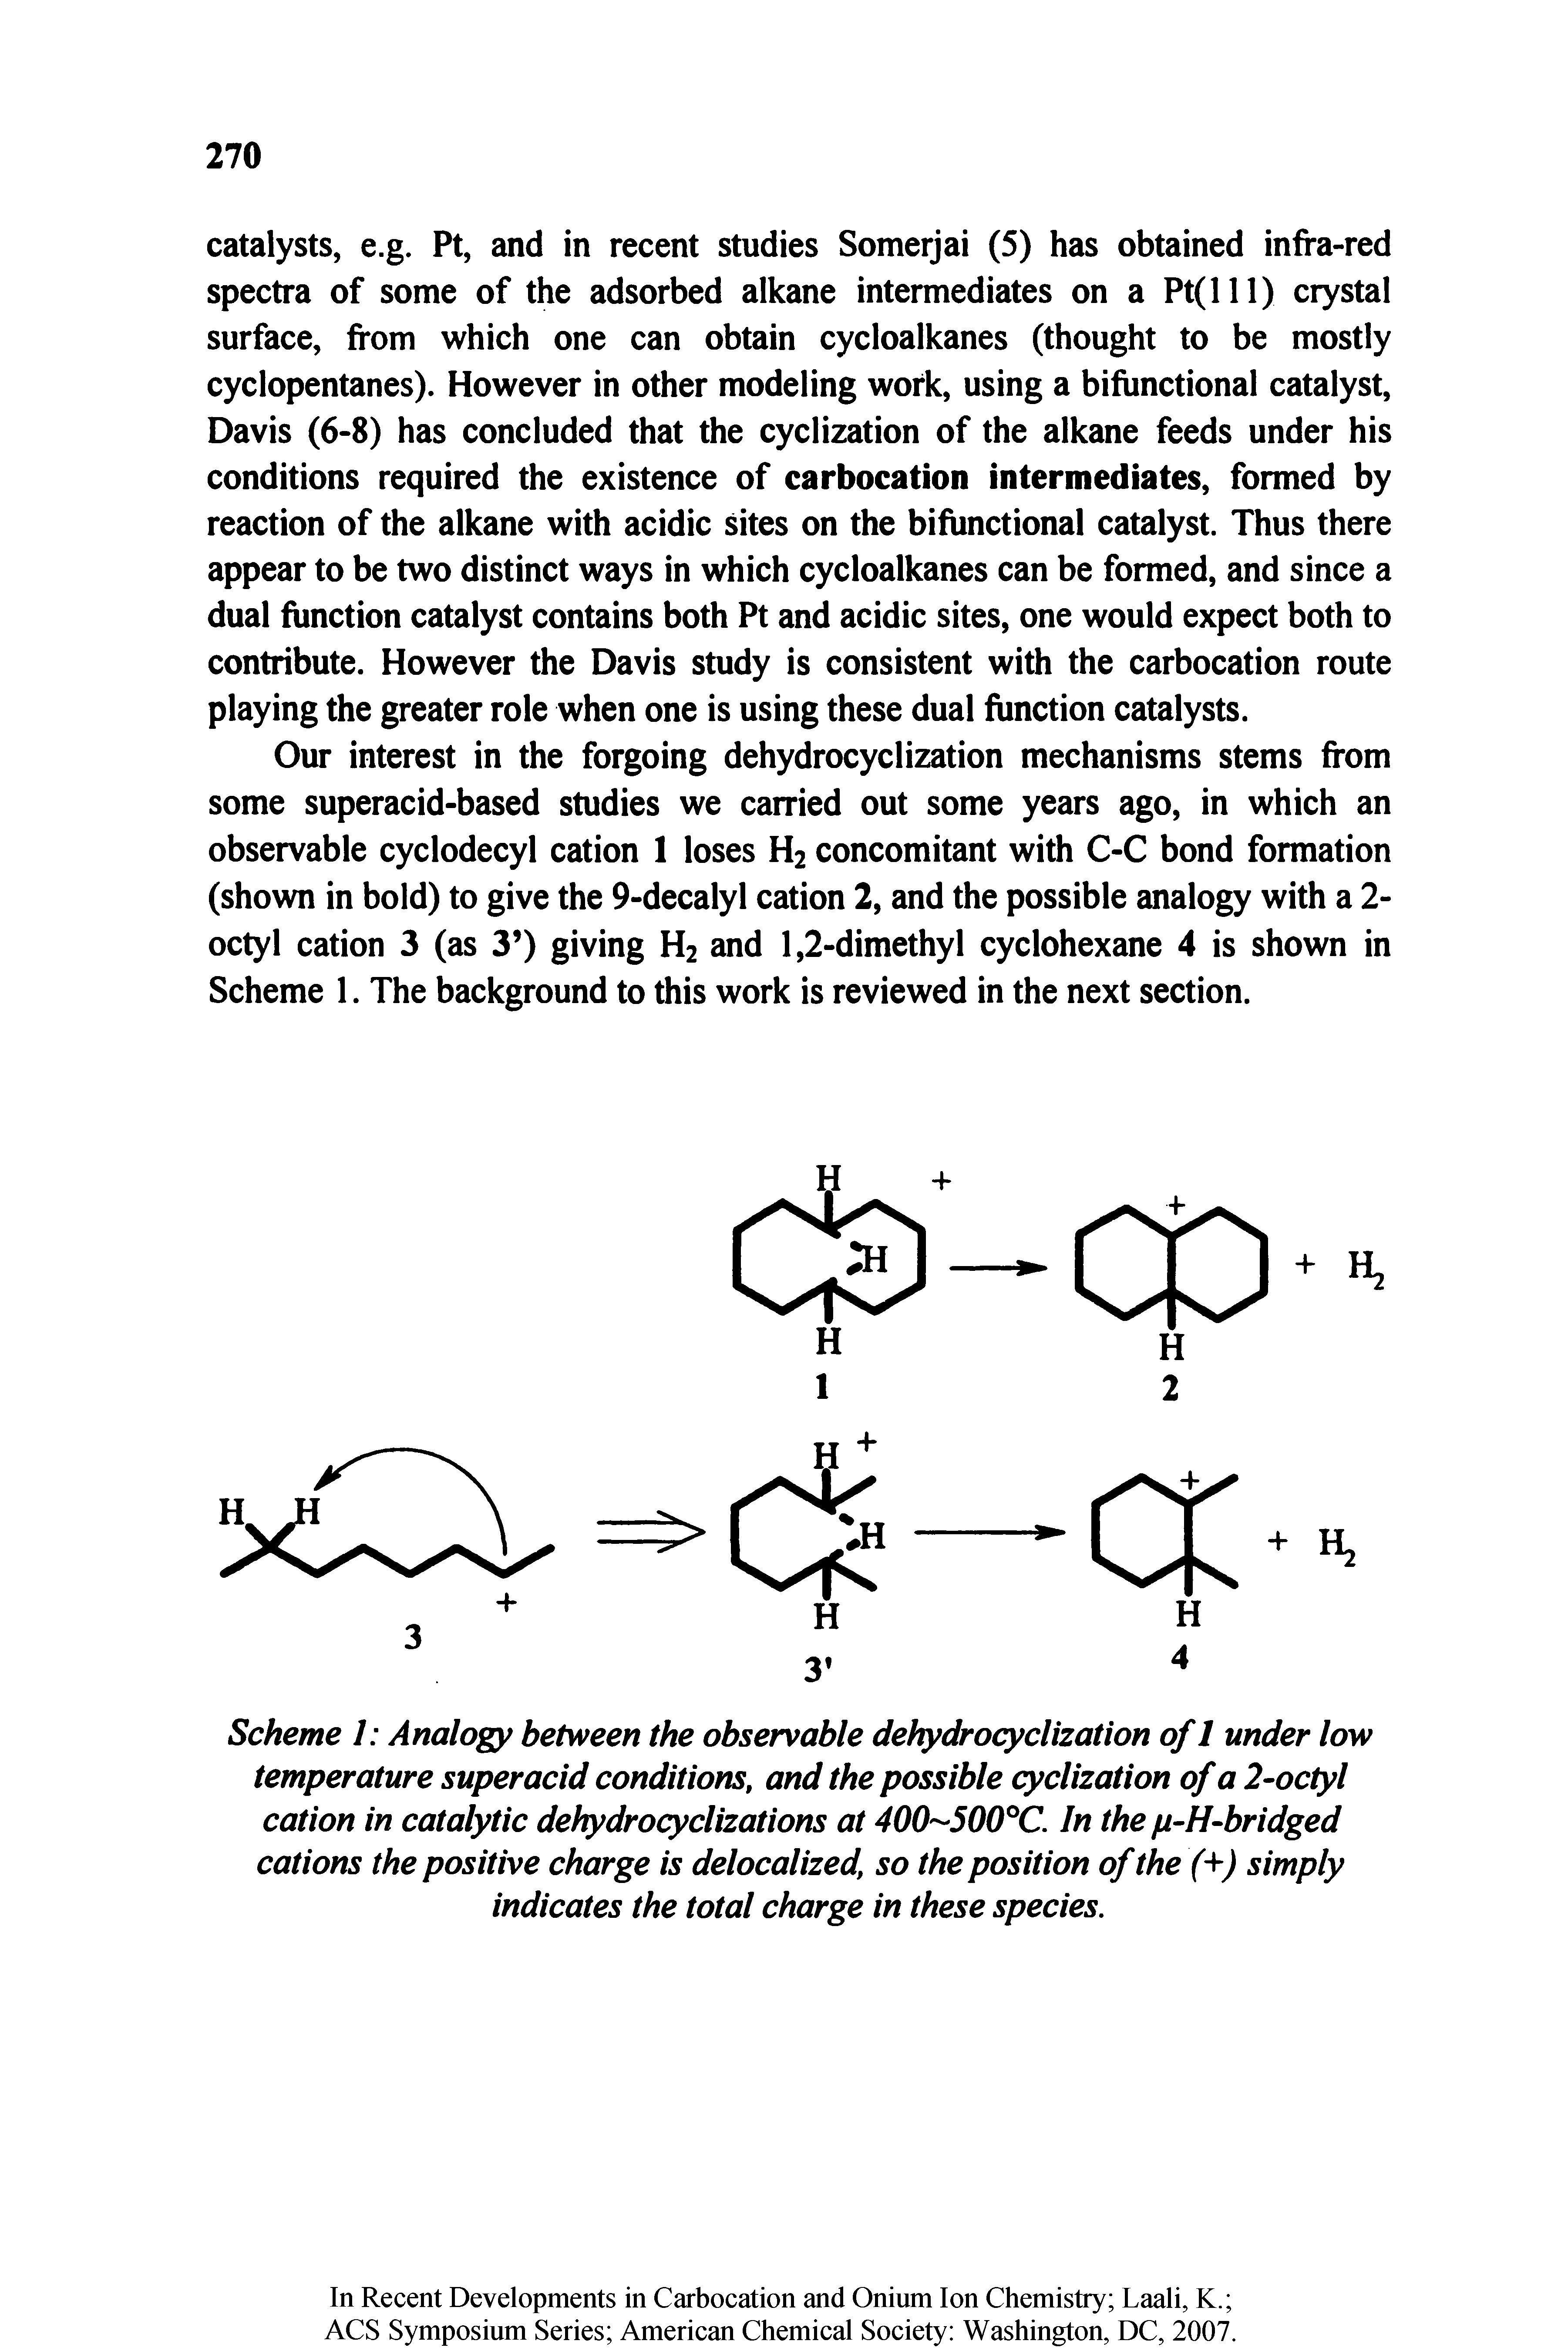 Scheme 1 Analogy between the observable dehydrocyclization of 1 under low temperature superacid conditions, and the possible cyclization of a 2-octyl cation in catalytic dehydrocyclizations at 400-500 C. In the p-H-bridged cations the positive charge is delocalized, so the position of the (+) simply indicates the total charge in these species.